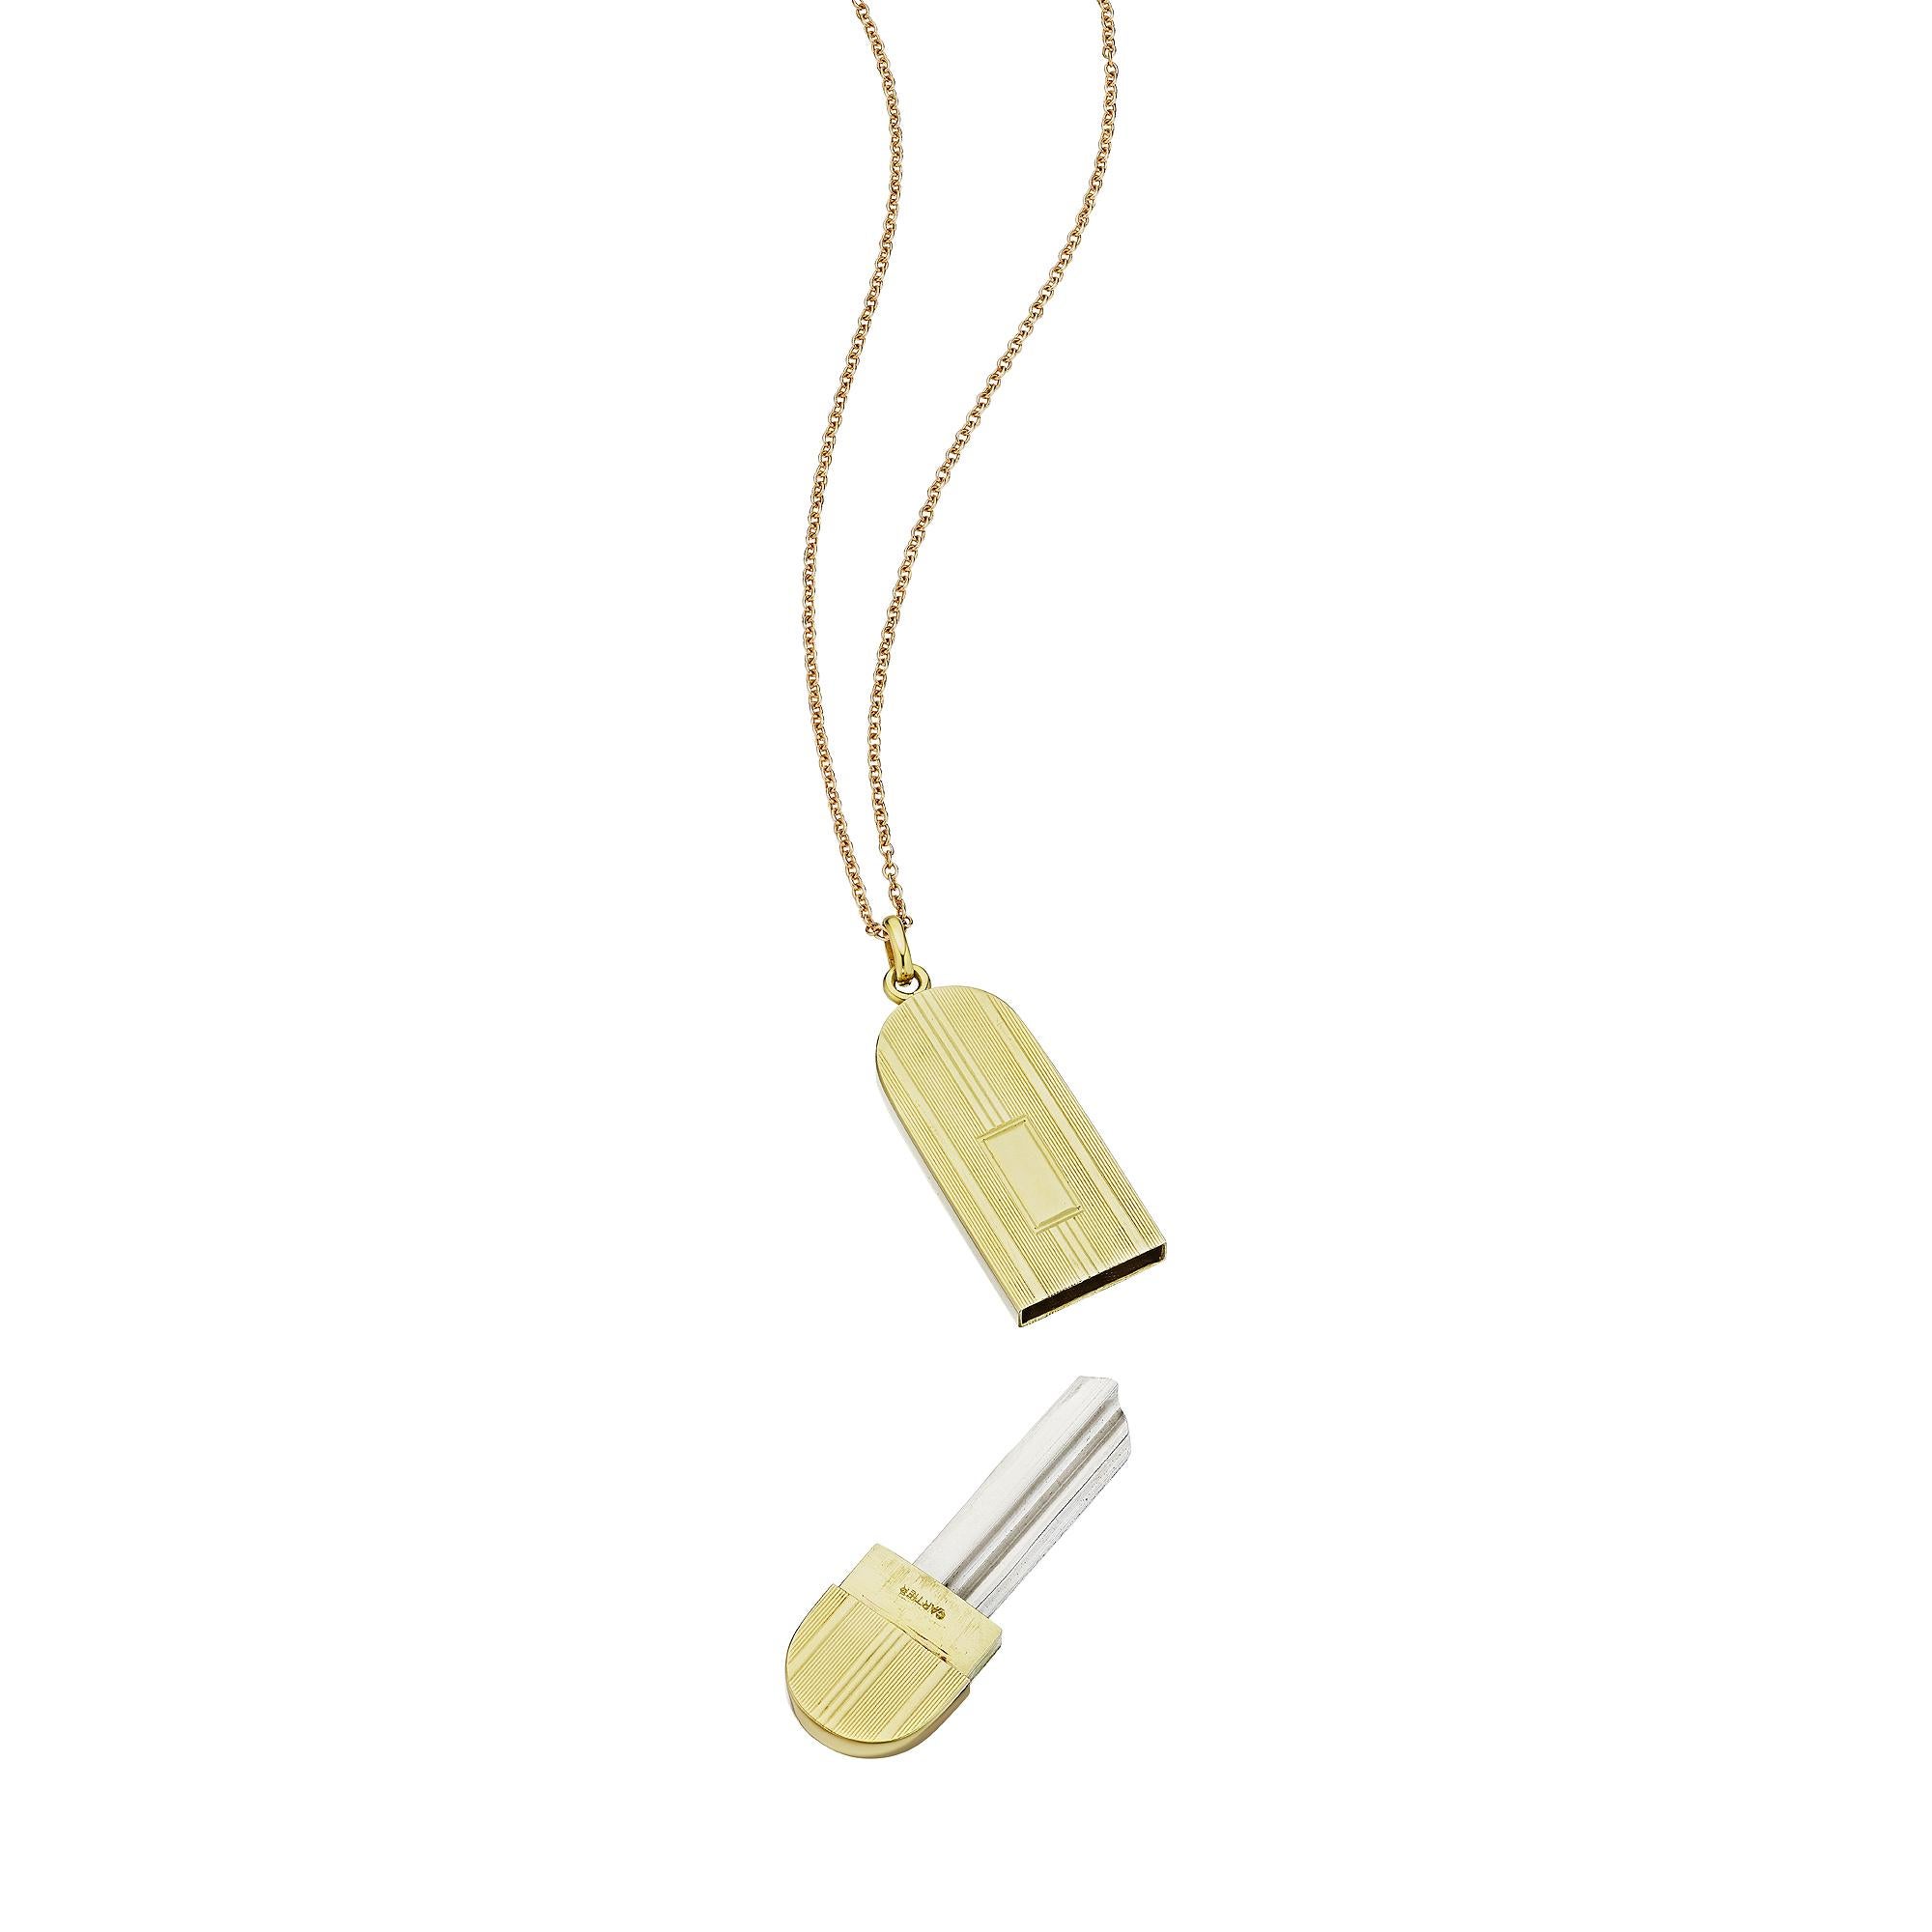 Give her the key to your heart with this Cartier Art Deco 14 karat yellow gold key case pendant necklace.  With a blank key enclosed in a handsome linear engraved oval case, that can be made into a personal key of your choice, this pendant necklace